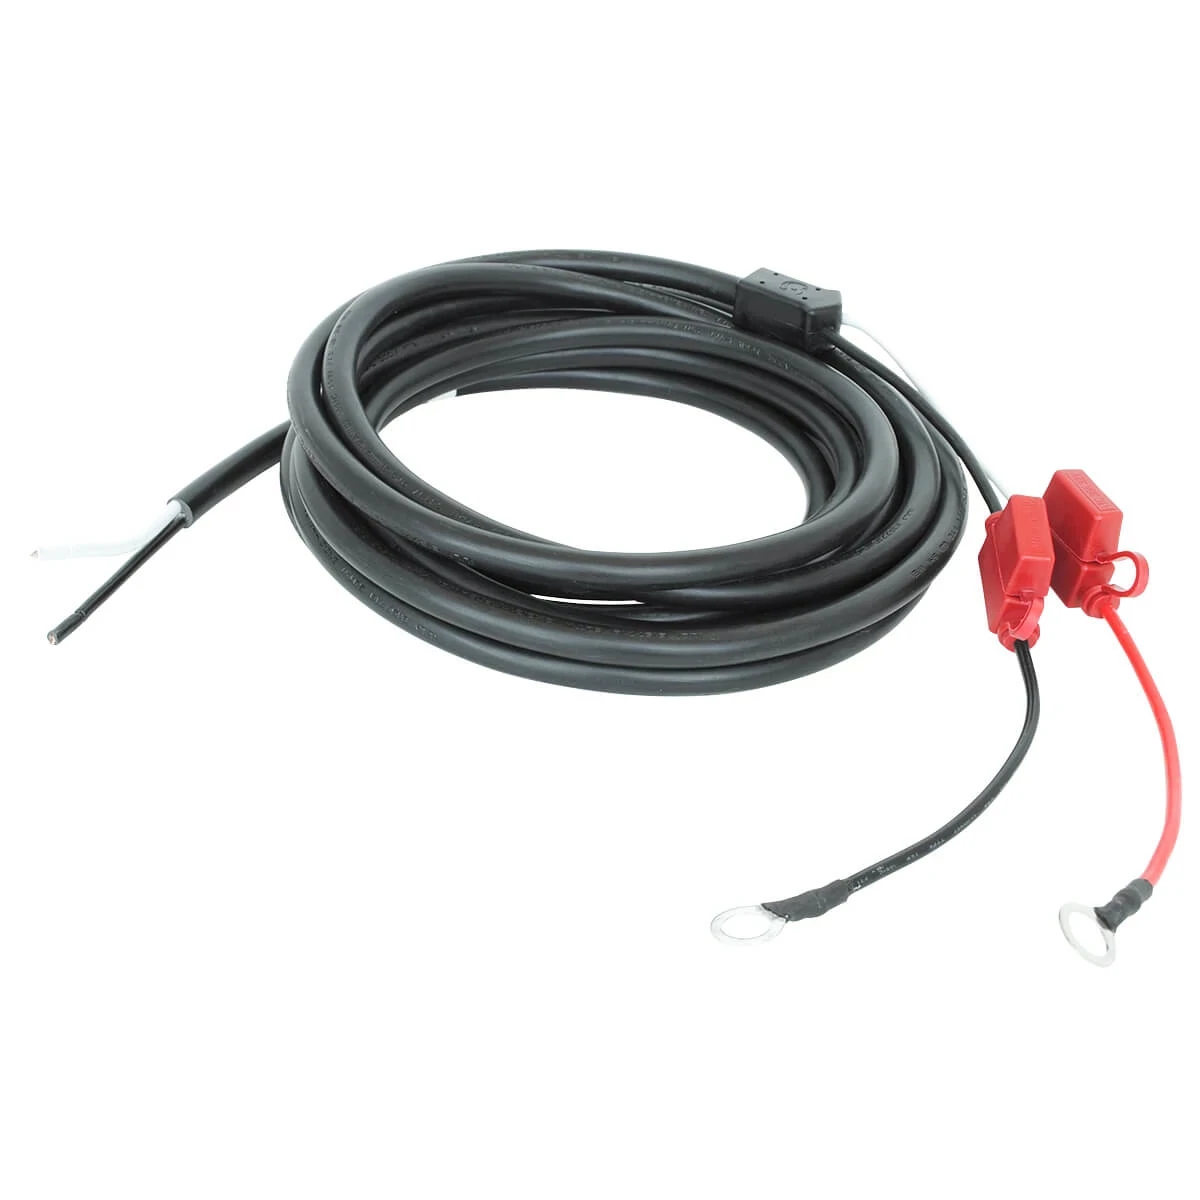 Battery Charger Extension Cable 15 foot